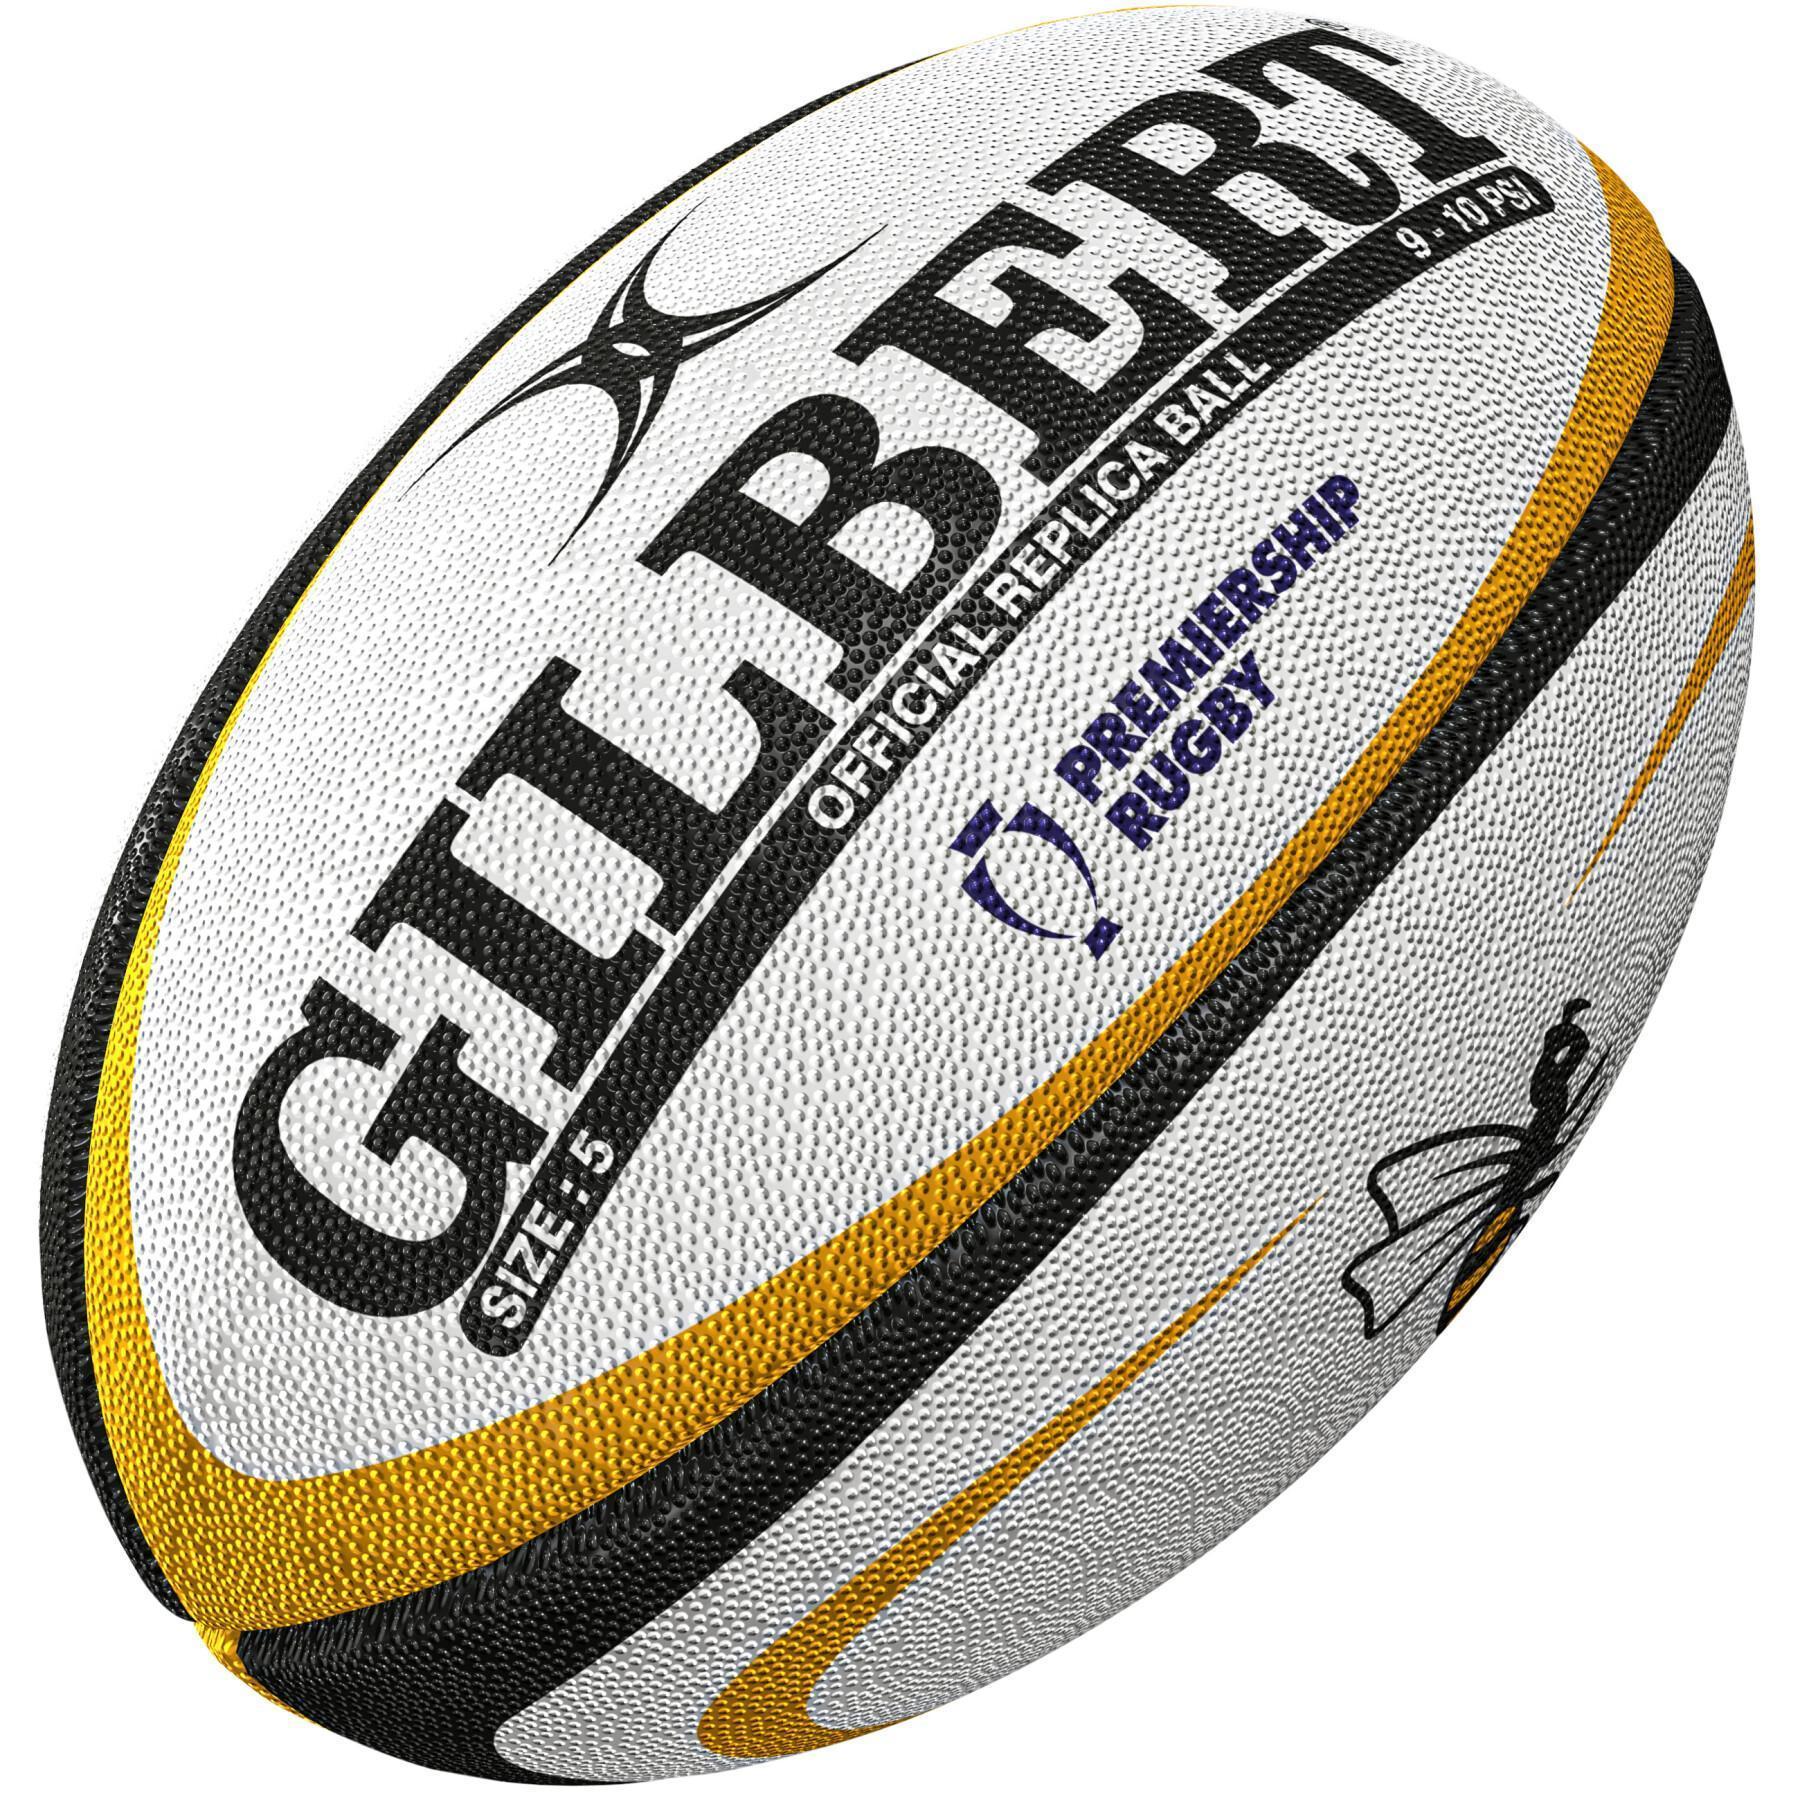 Rugby ball Wasps